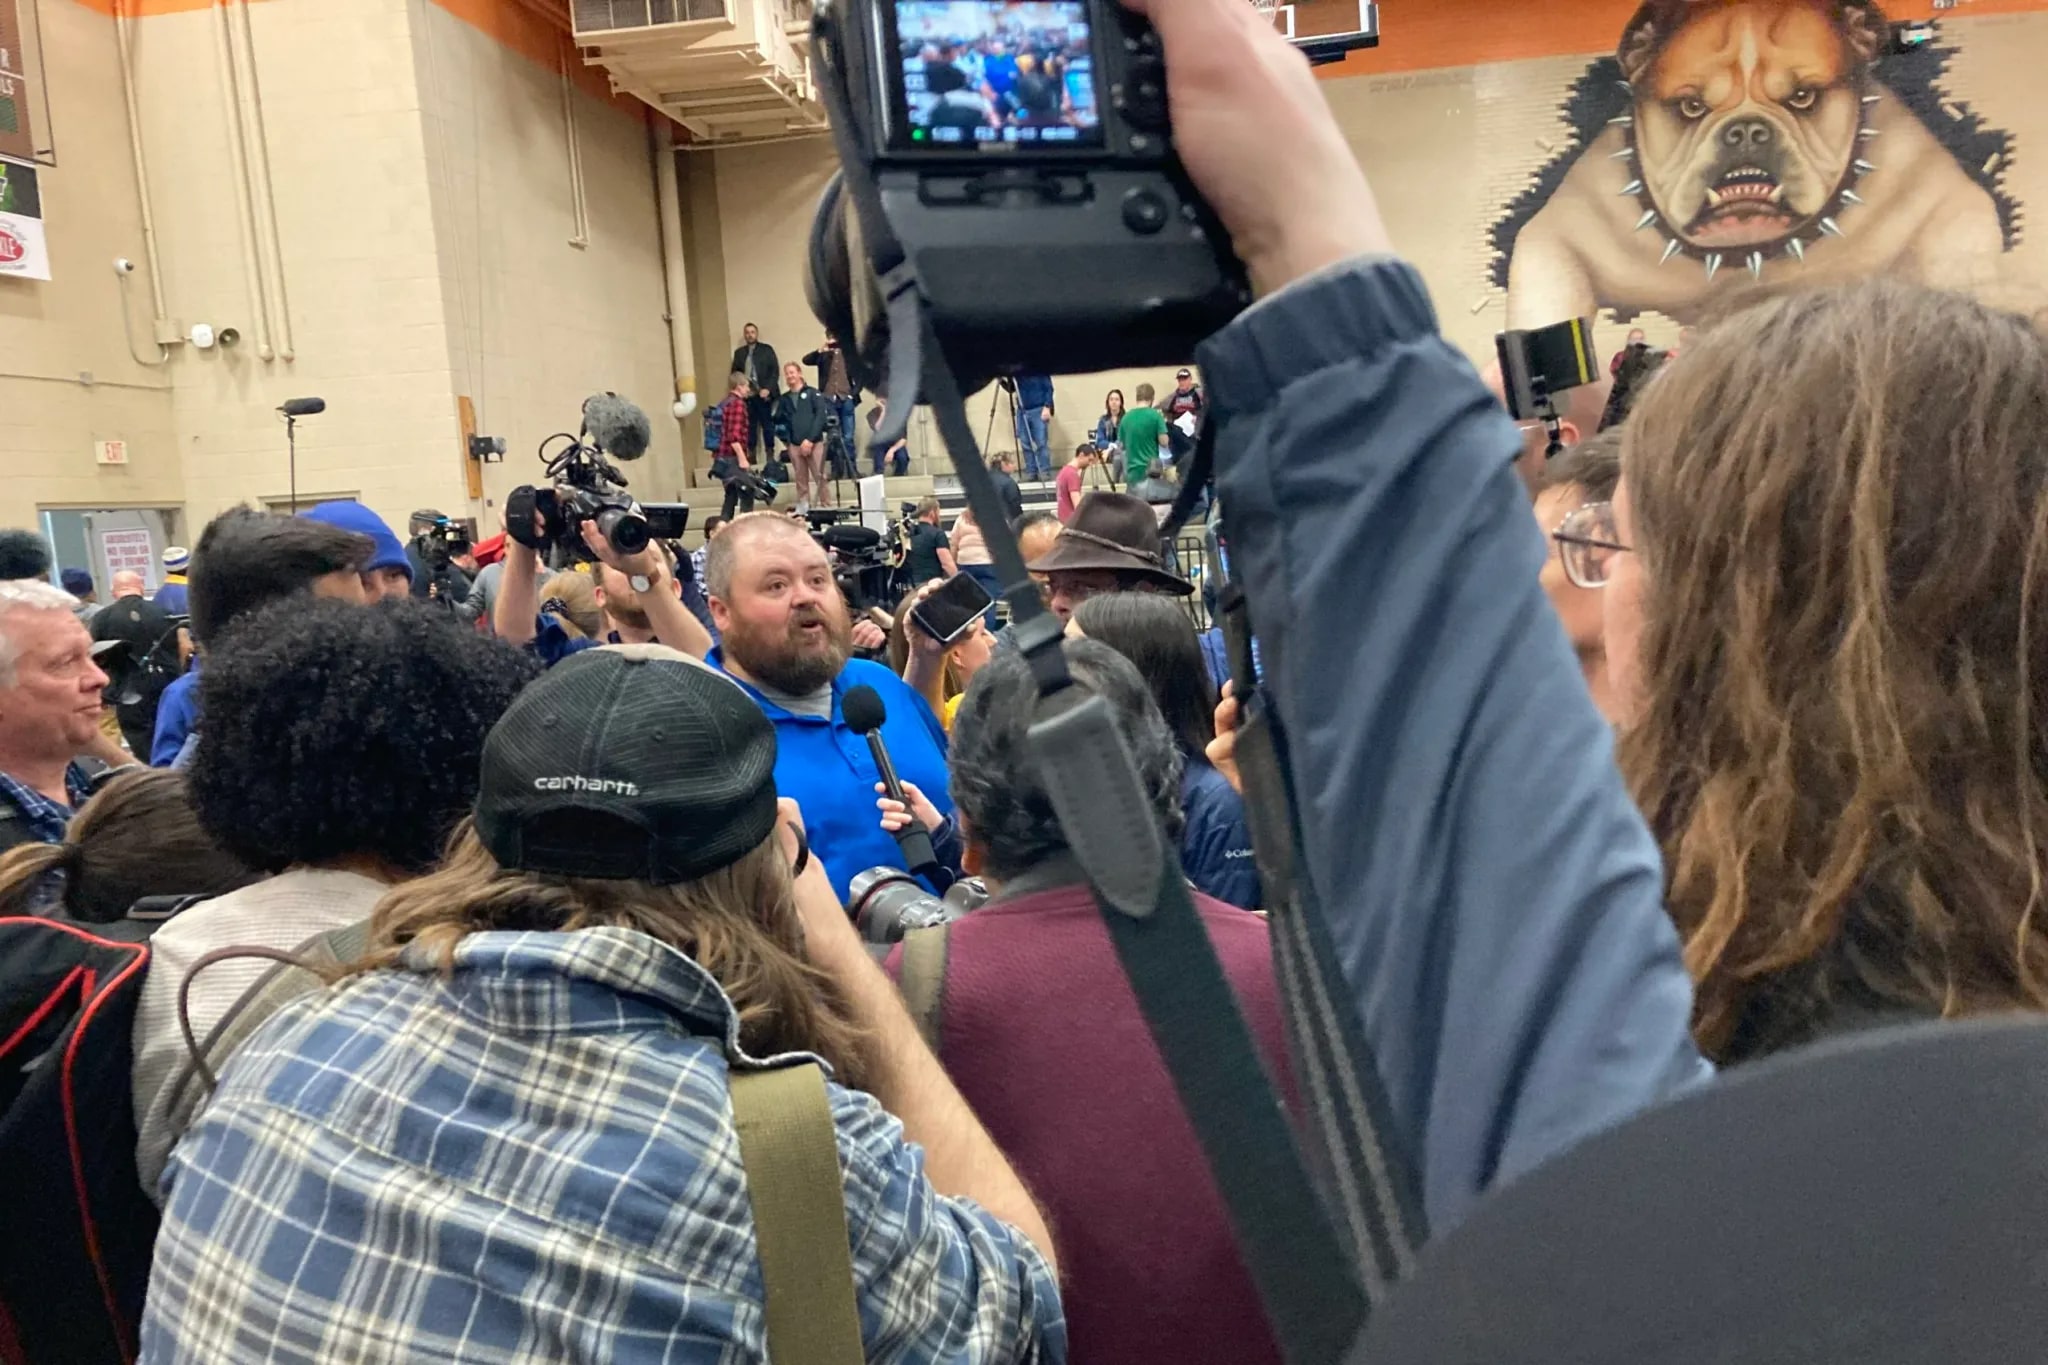 a crowd of reporters gather around a man in a blue shirt, someone is holding up a mic near him